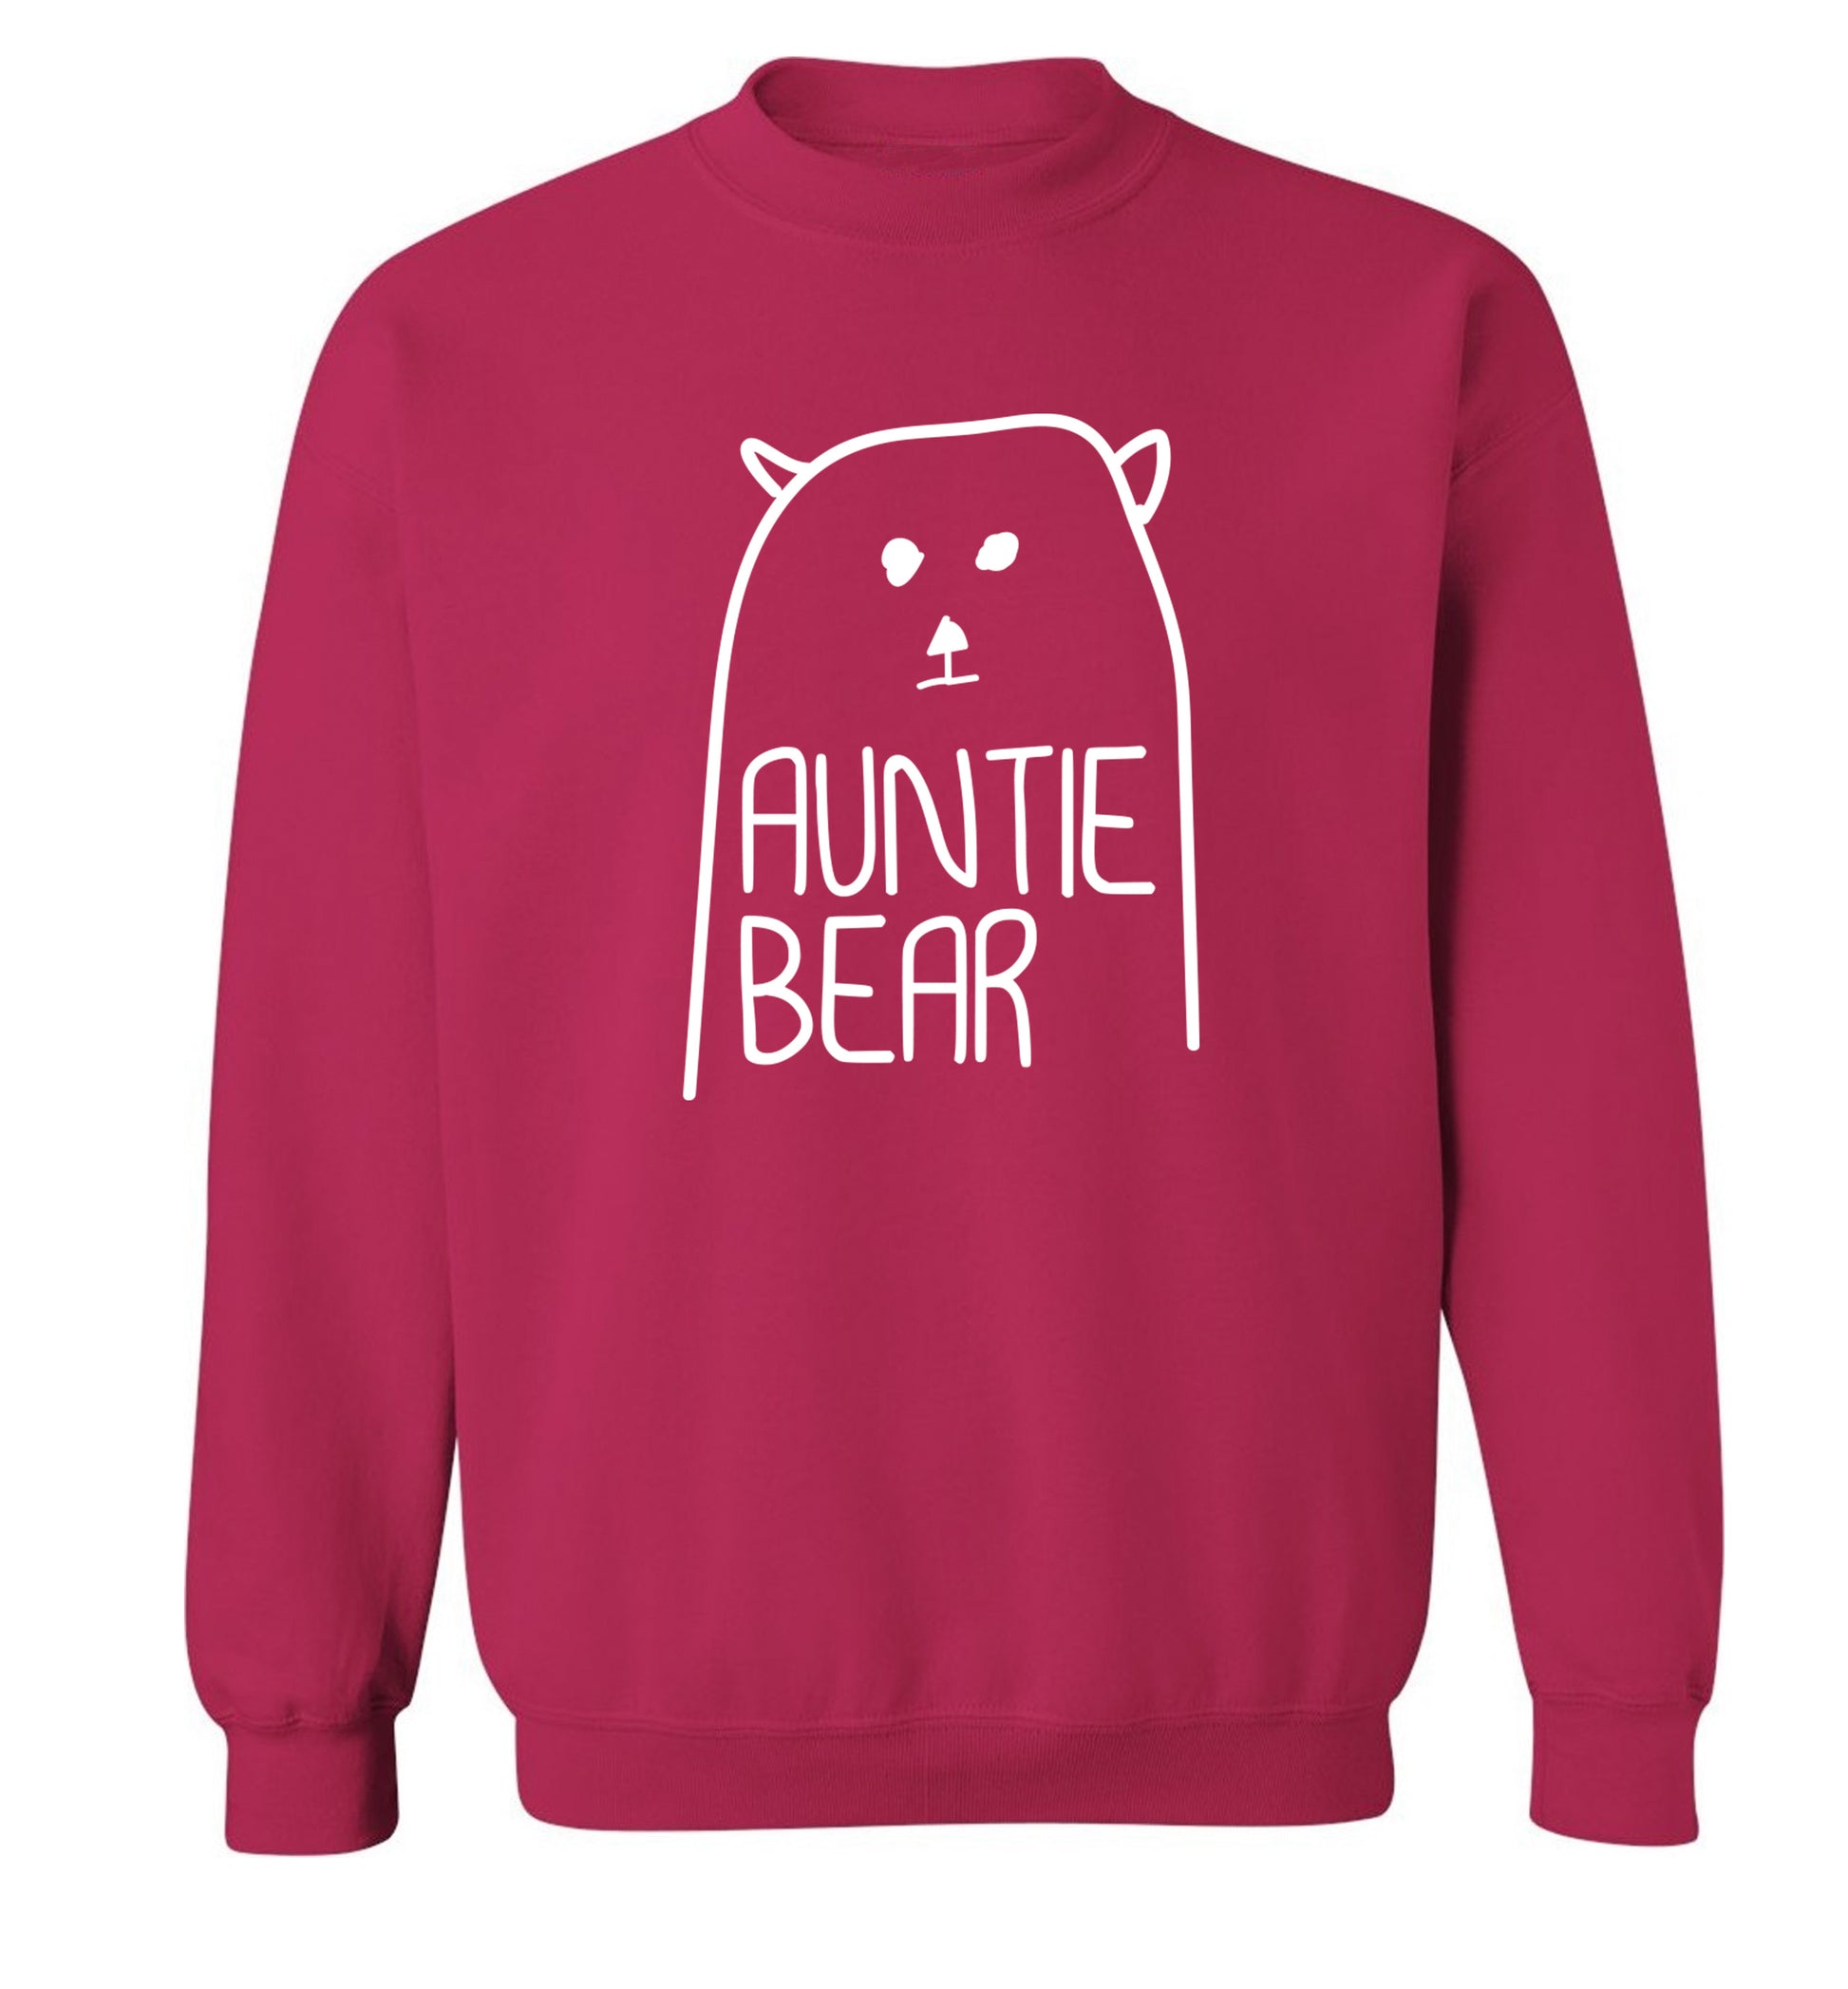 Auntie bear Adult's unisex pink Sweater 2XL